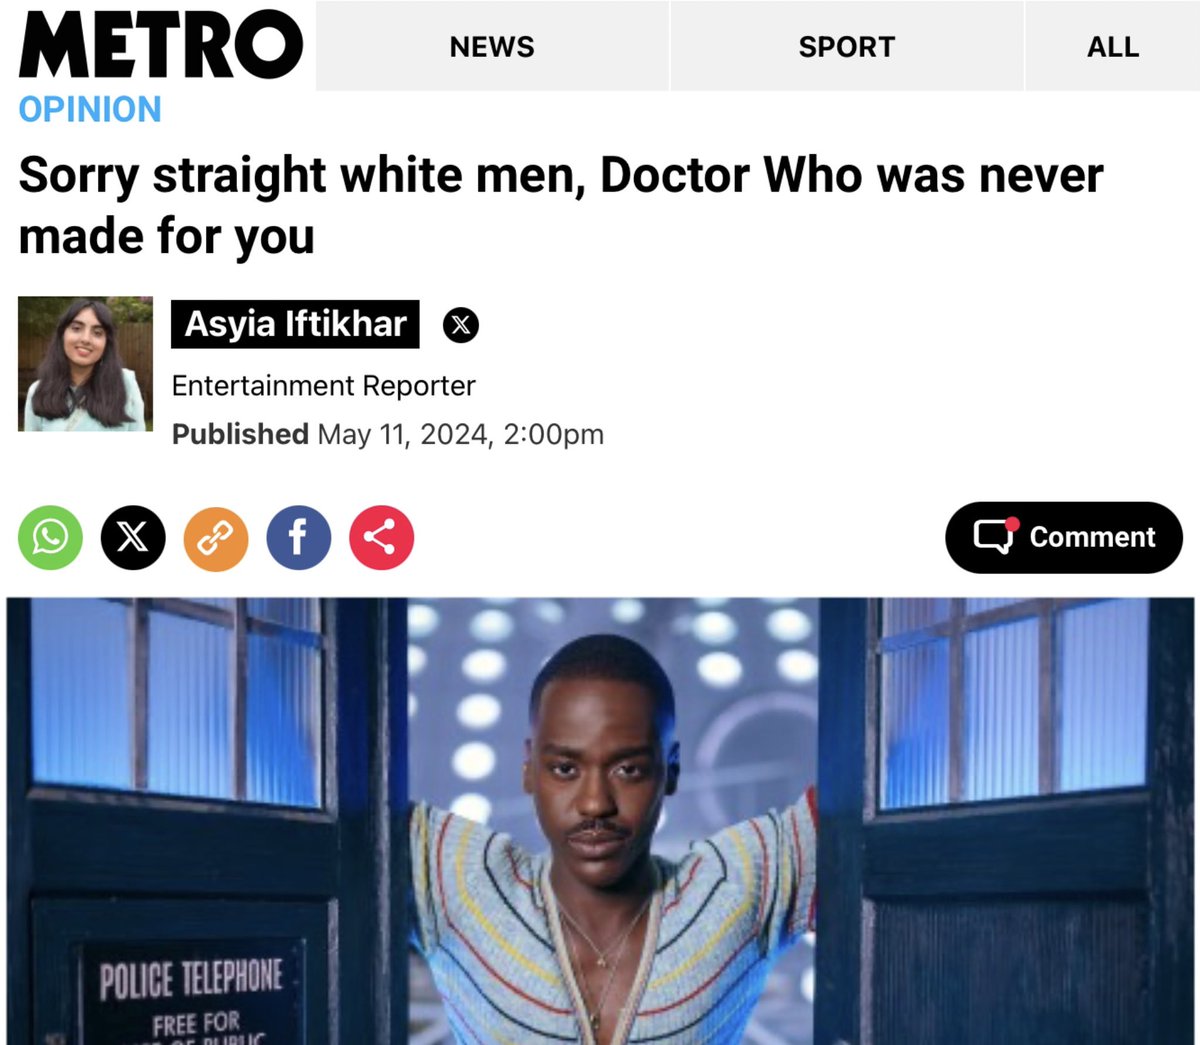 Headline in six months from now: Why are straight white men refusing to see Doctor Who???